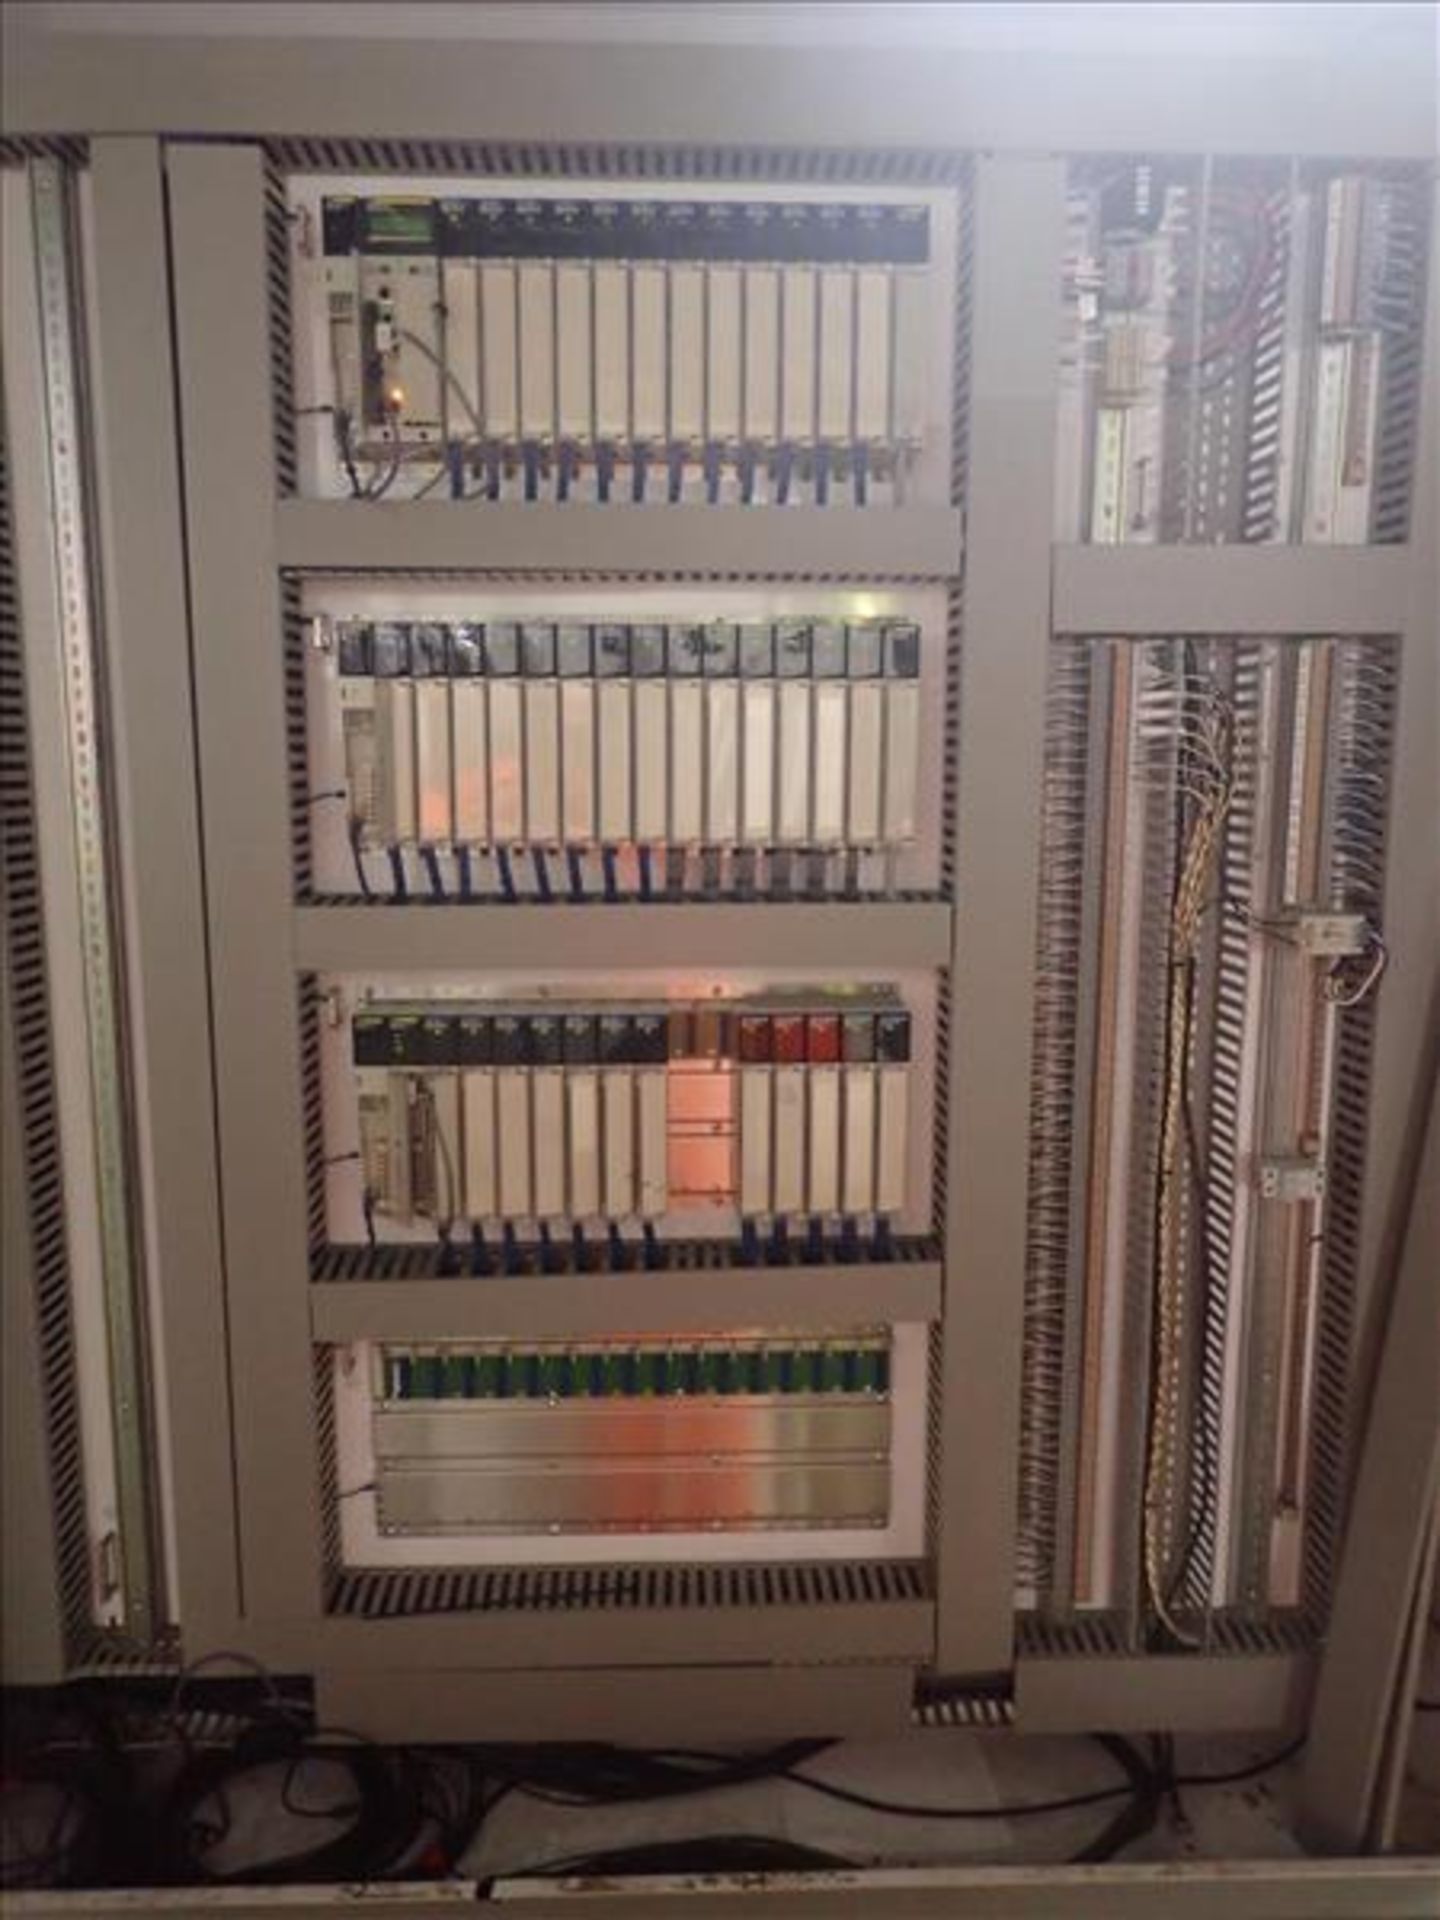 PLC distributed control system (Tag 7140 Loc Central Sub Stn) - Image 2 of 3